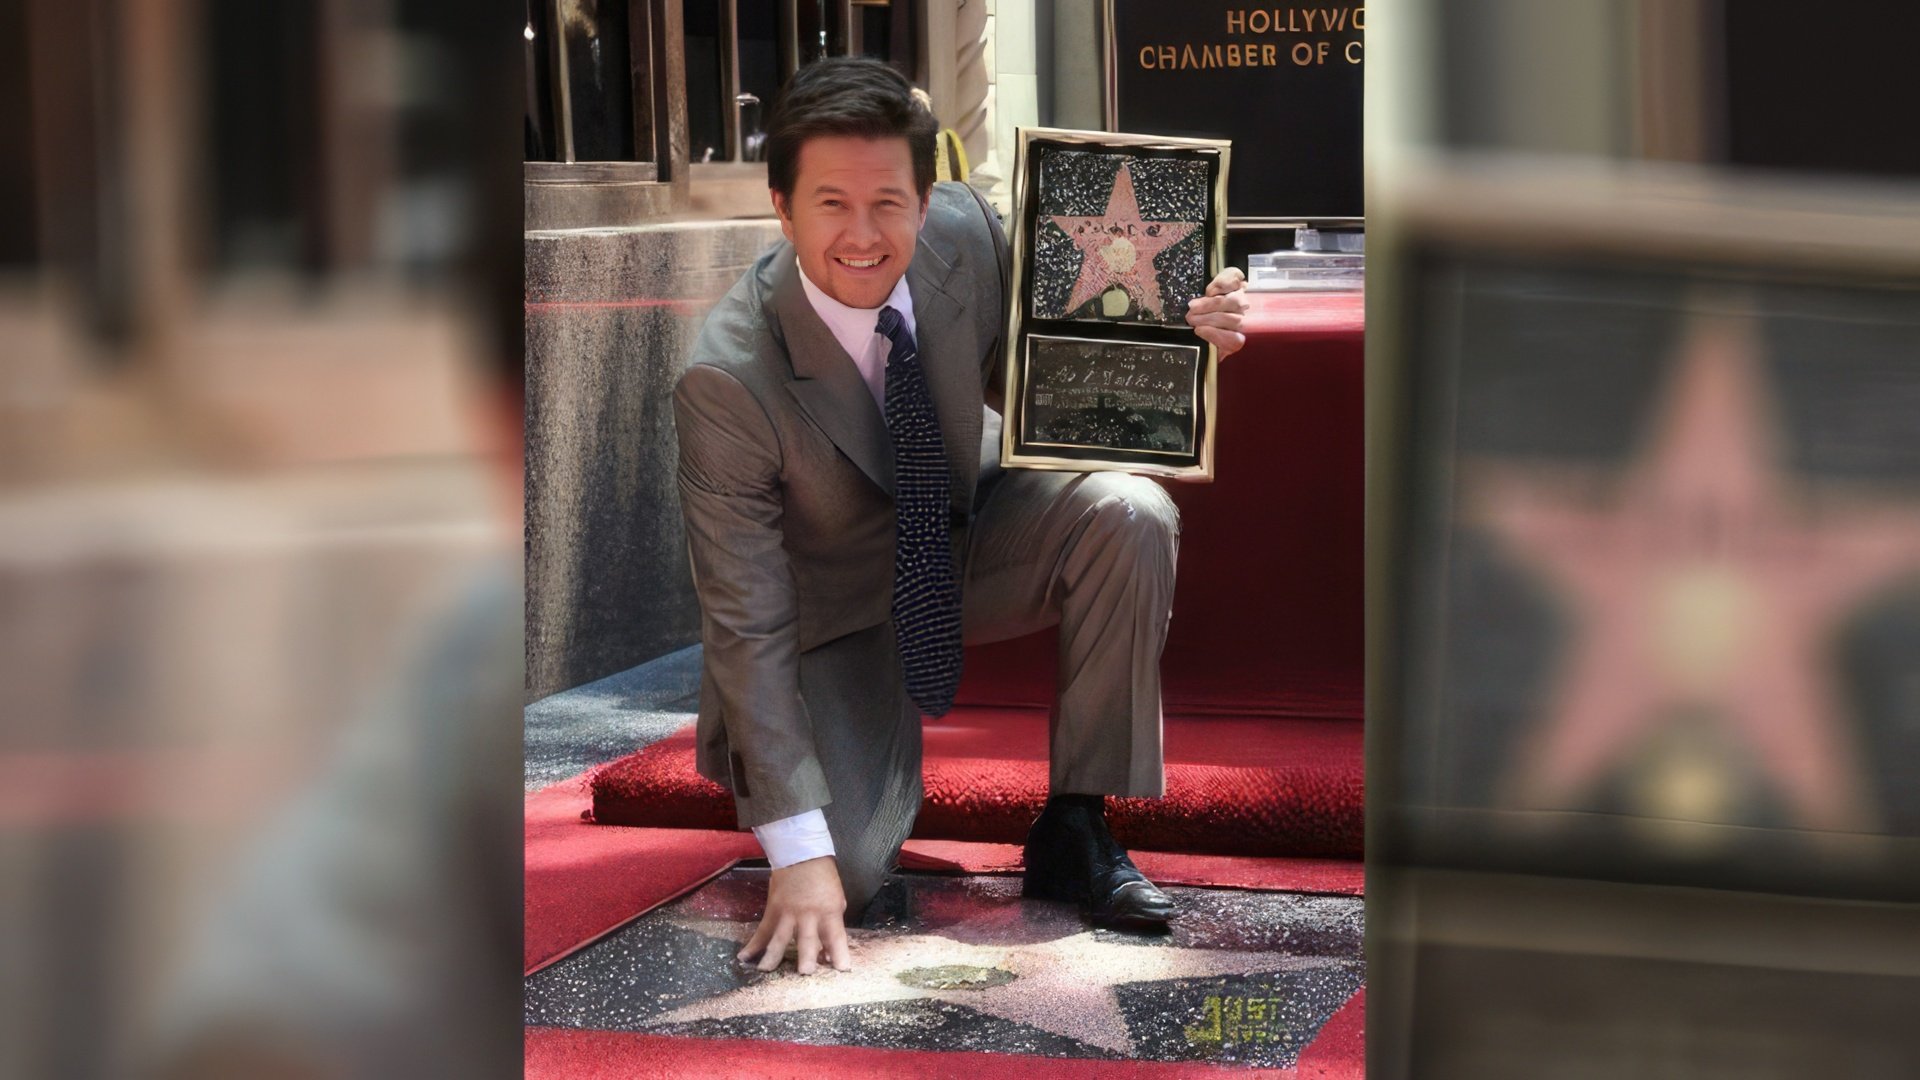 Mark Wahlberg has his own star on the Hollywood Walk of Fame